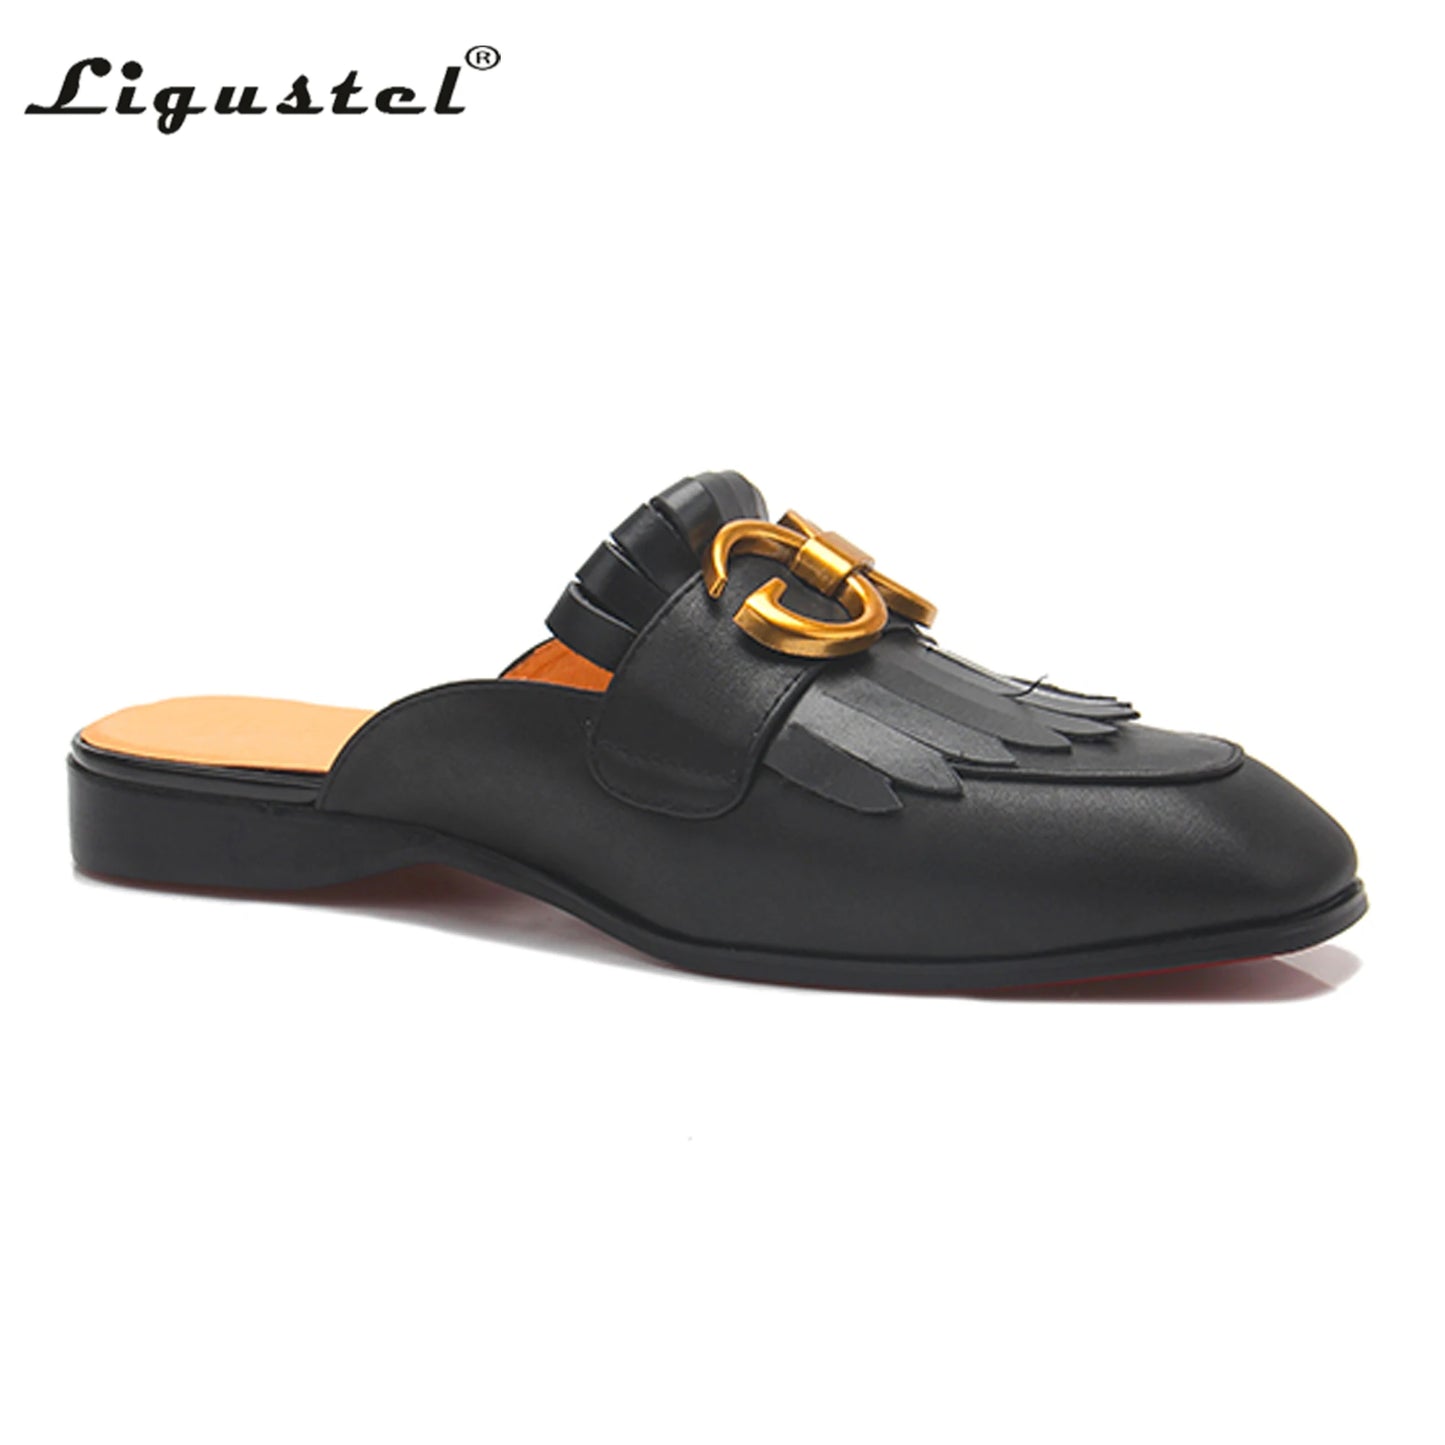 Men Metallic Textured Loafers Luxury Formal Dress Red bottom Shoes Leather Wedding slip on Loafers Designer Black Fashion Shoes